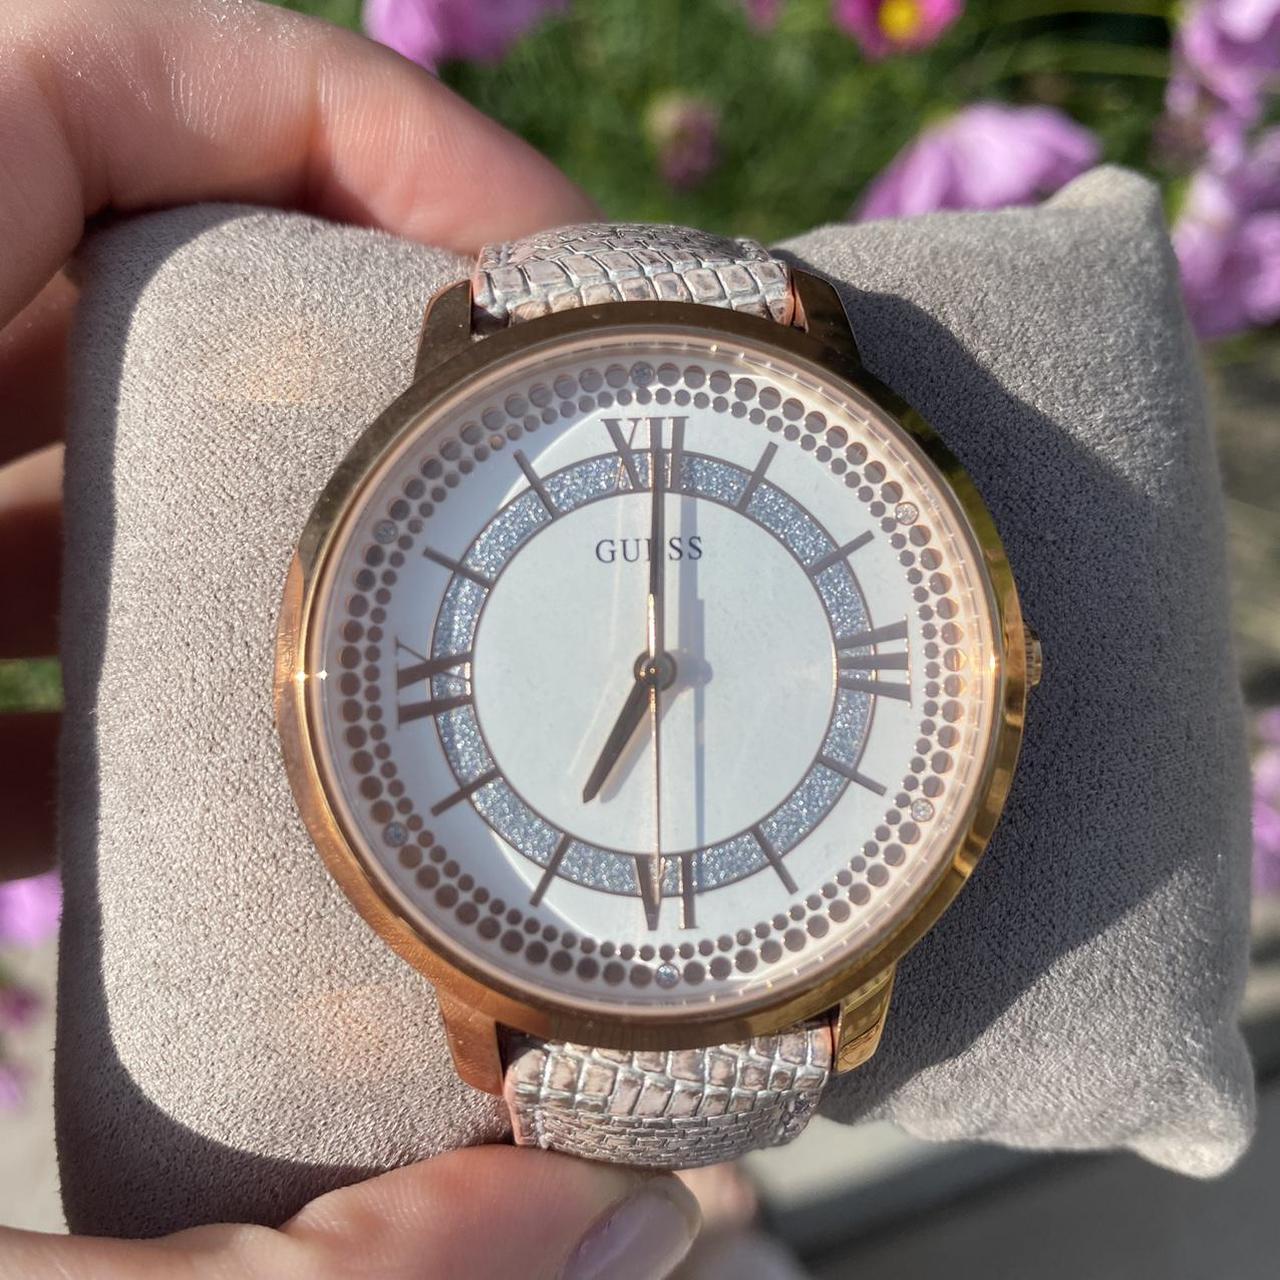 Product Image 2 - Guess ladies watch 💘
super cute